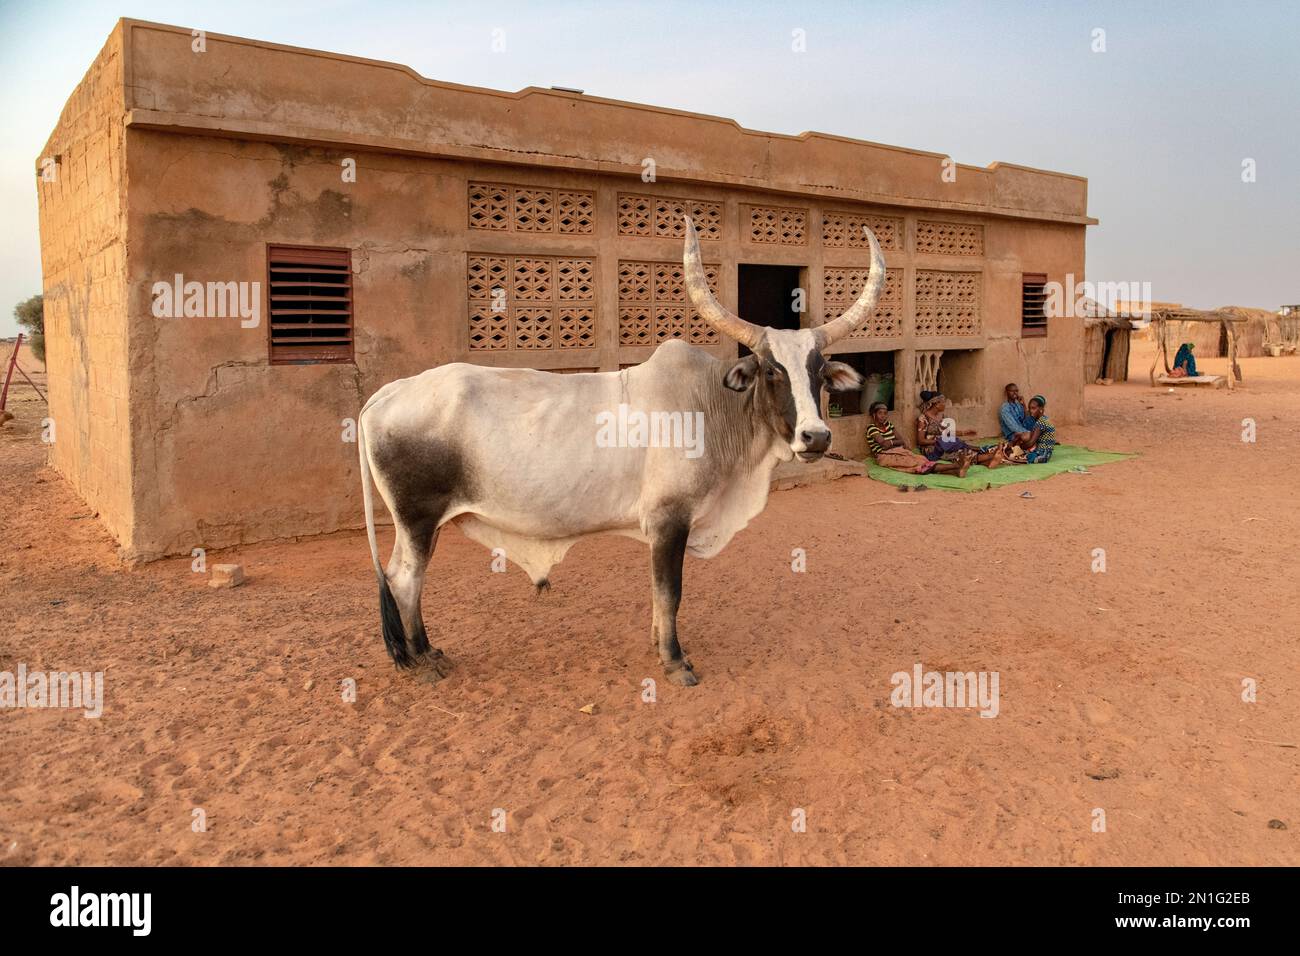 Bull standing in front of a village main house in a rural area of Northern Senegal, West Africa, Africa Stock Photo